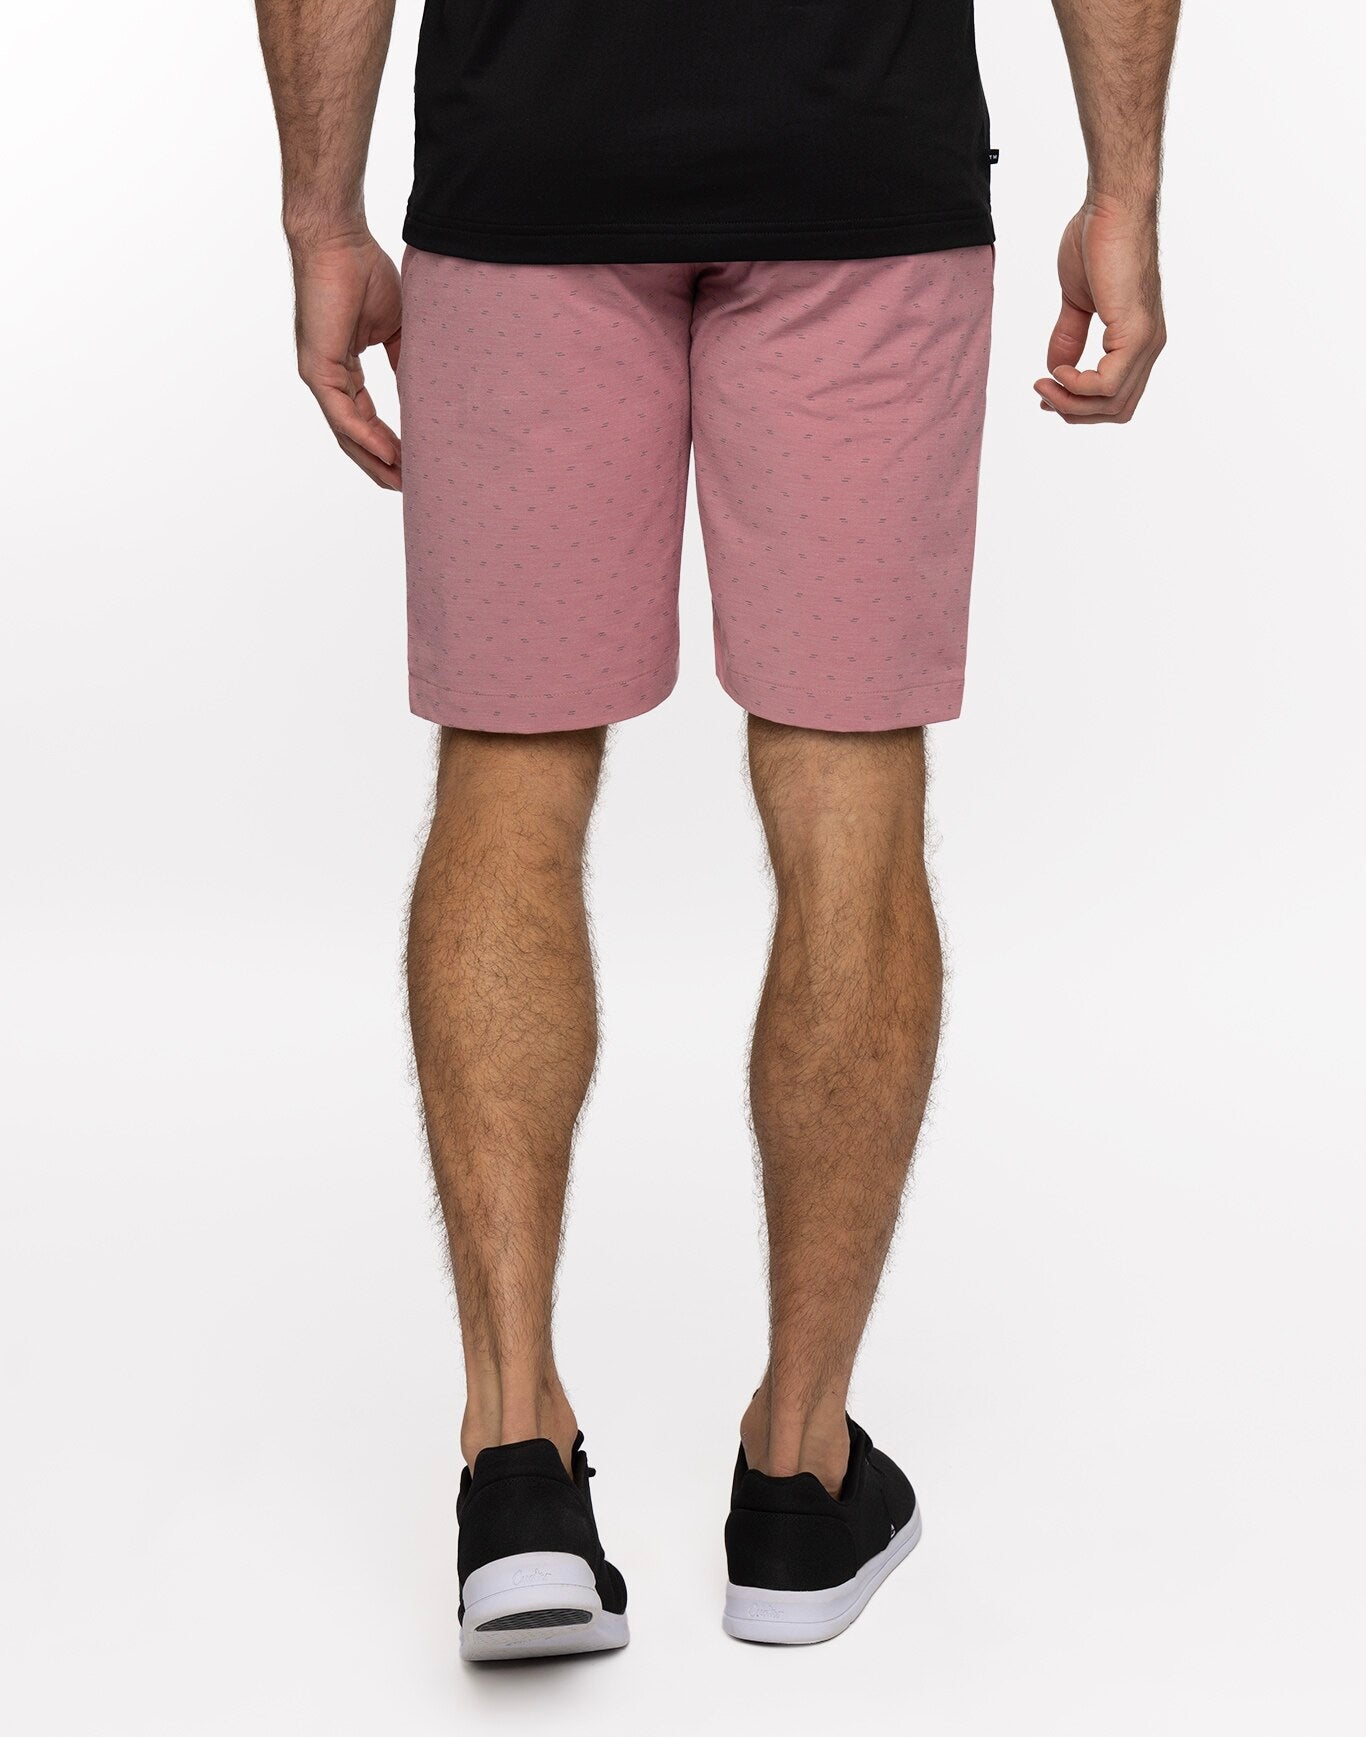 The MANZANILLO short delivers a look and feel you can’t help but love. 